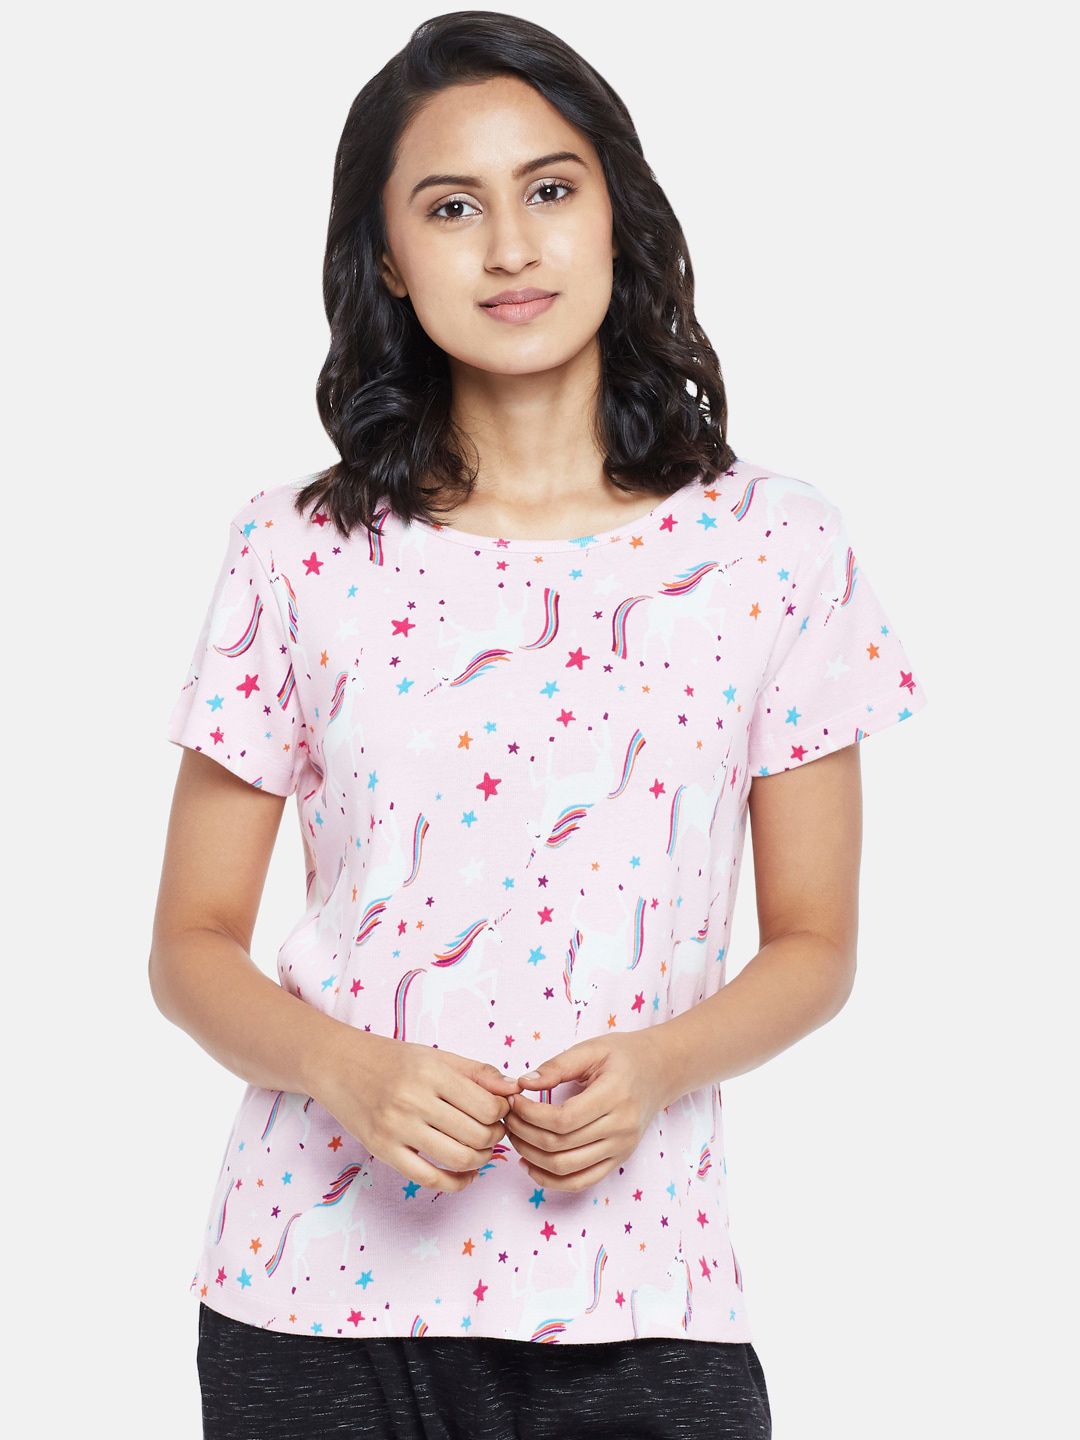 Dreamz by Pantaloons Pink & White Printed Lounge T-shirt Price in India